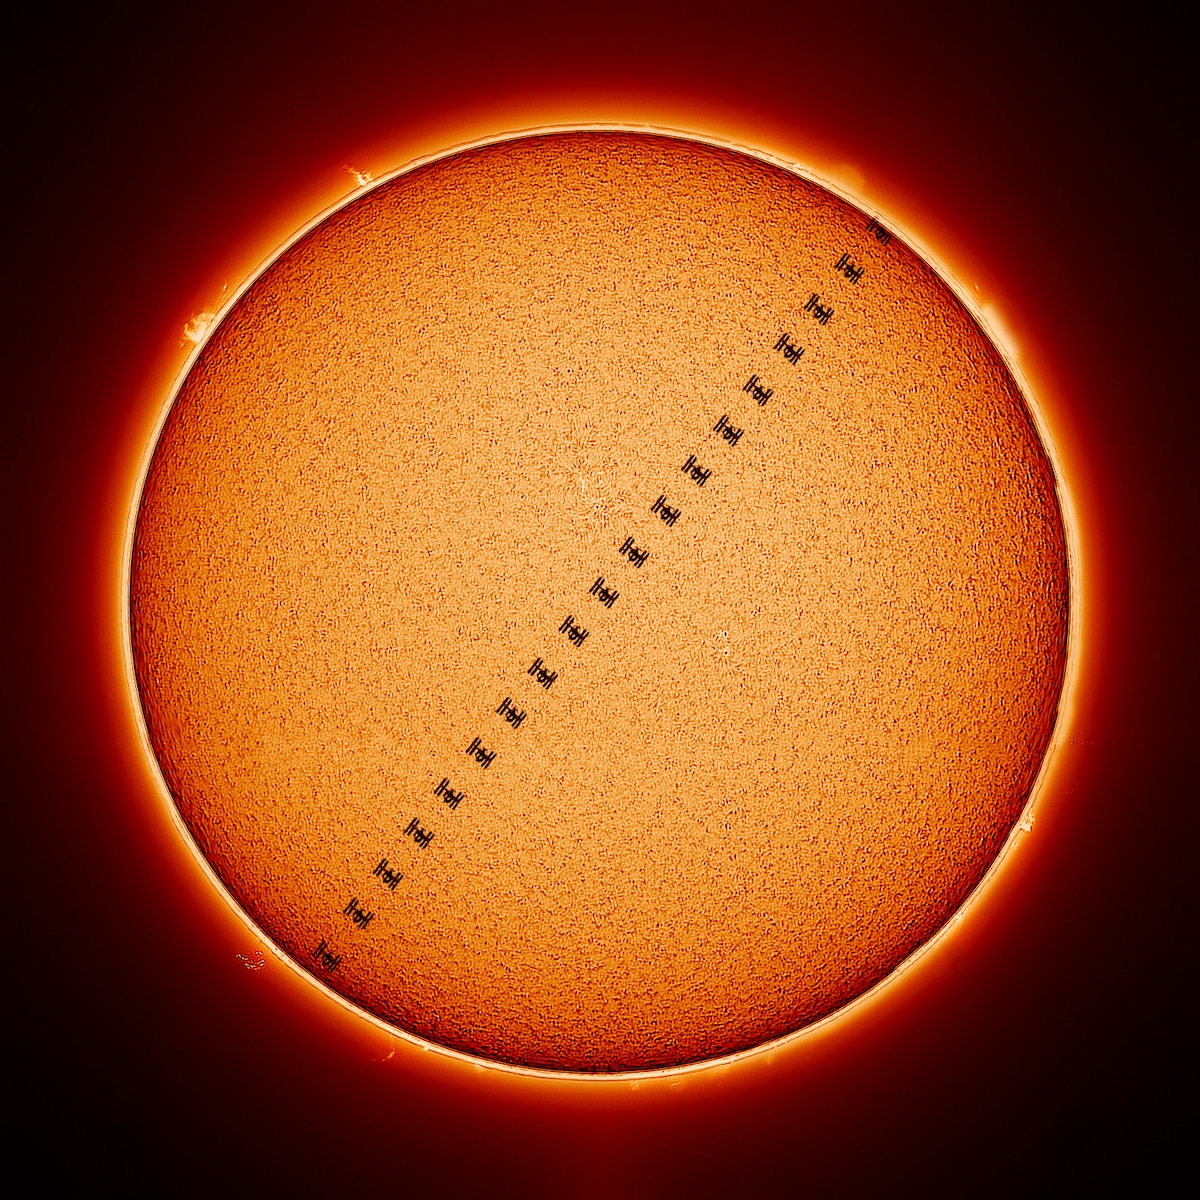 ISS Transiting the Sun by Mack Murdoc